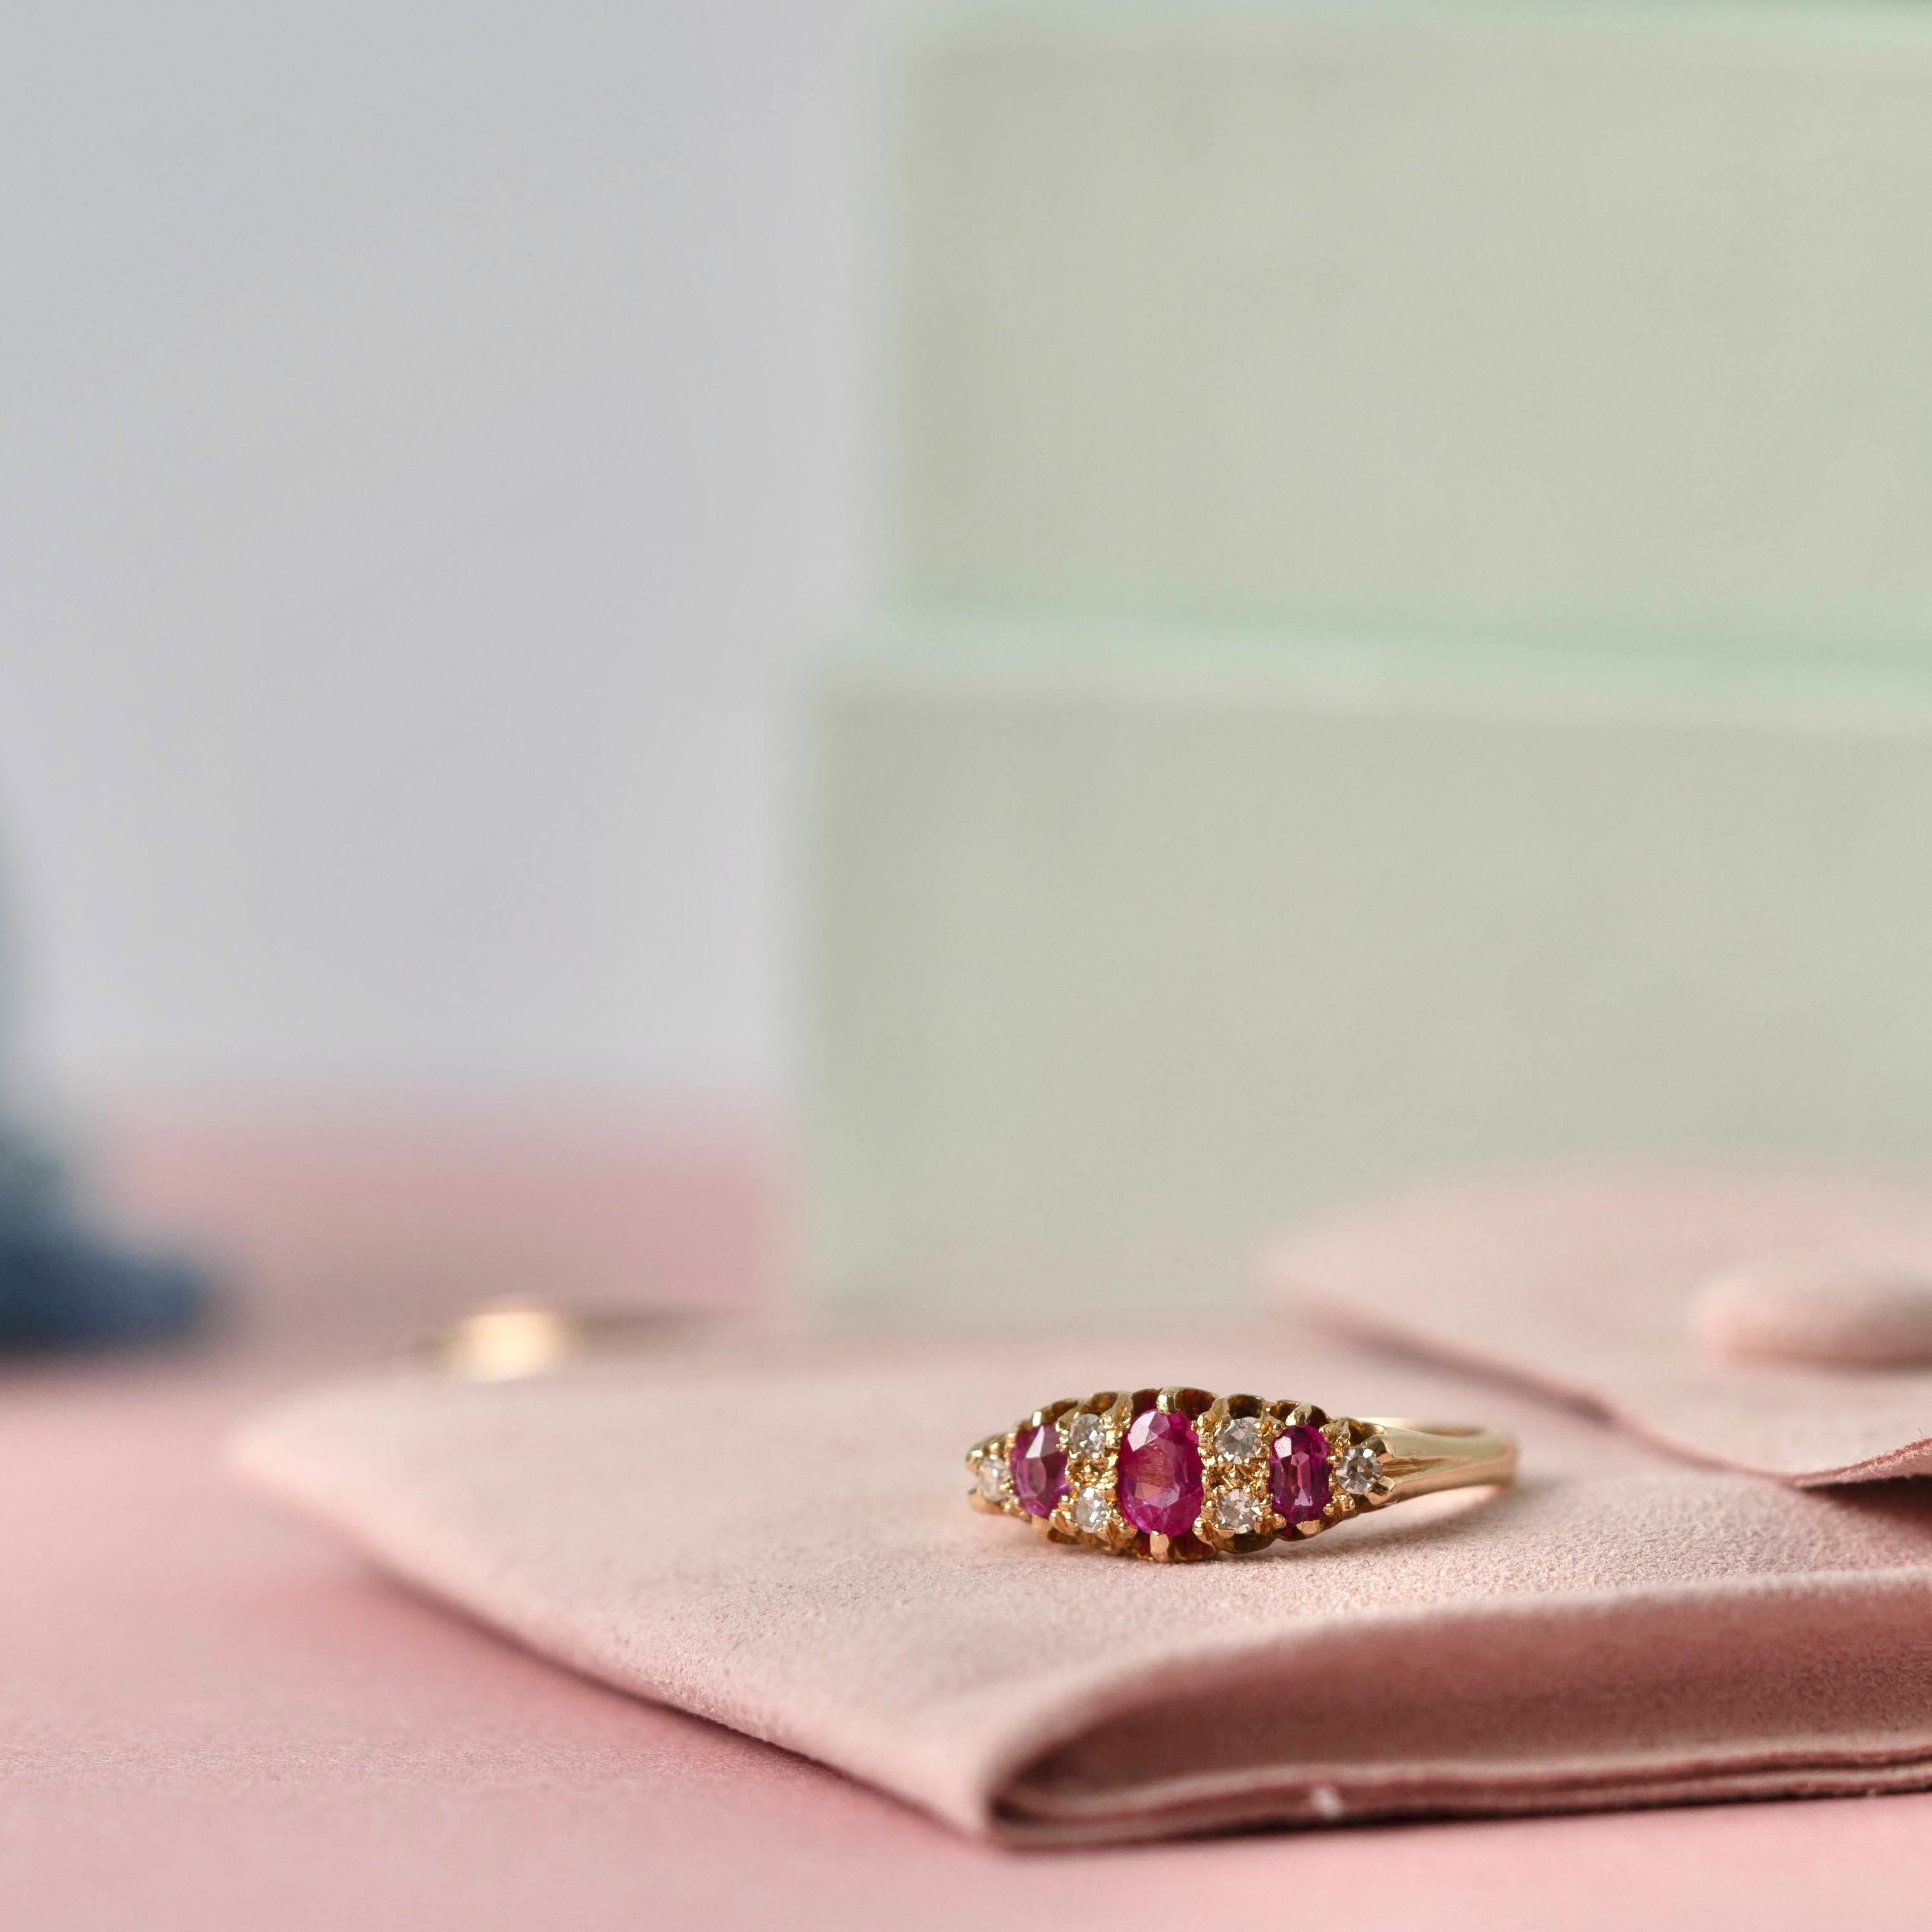 This stunning piece of jewelry is an authentic representation of Edwardian elegance, crafted in 1906. The ring features a trio of vivid oval rubies, interspersed with sparkling diamonds, creating a harmonious balance of color and brilliance. Set in